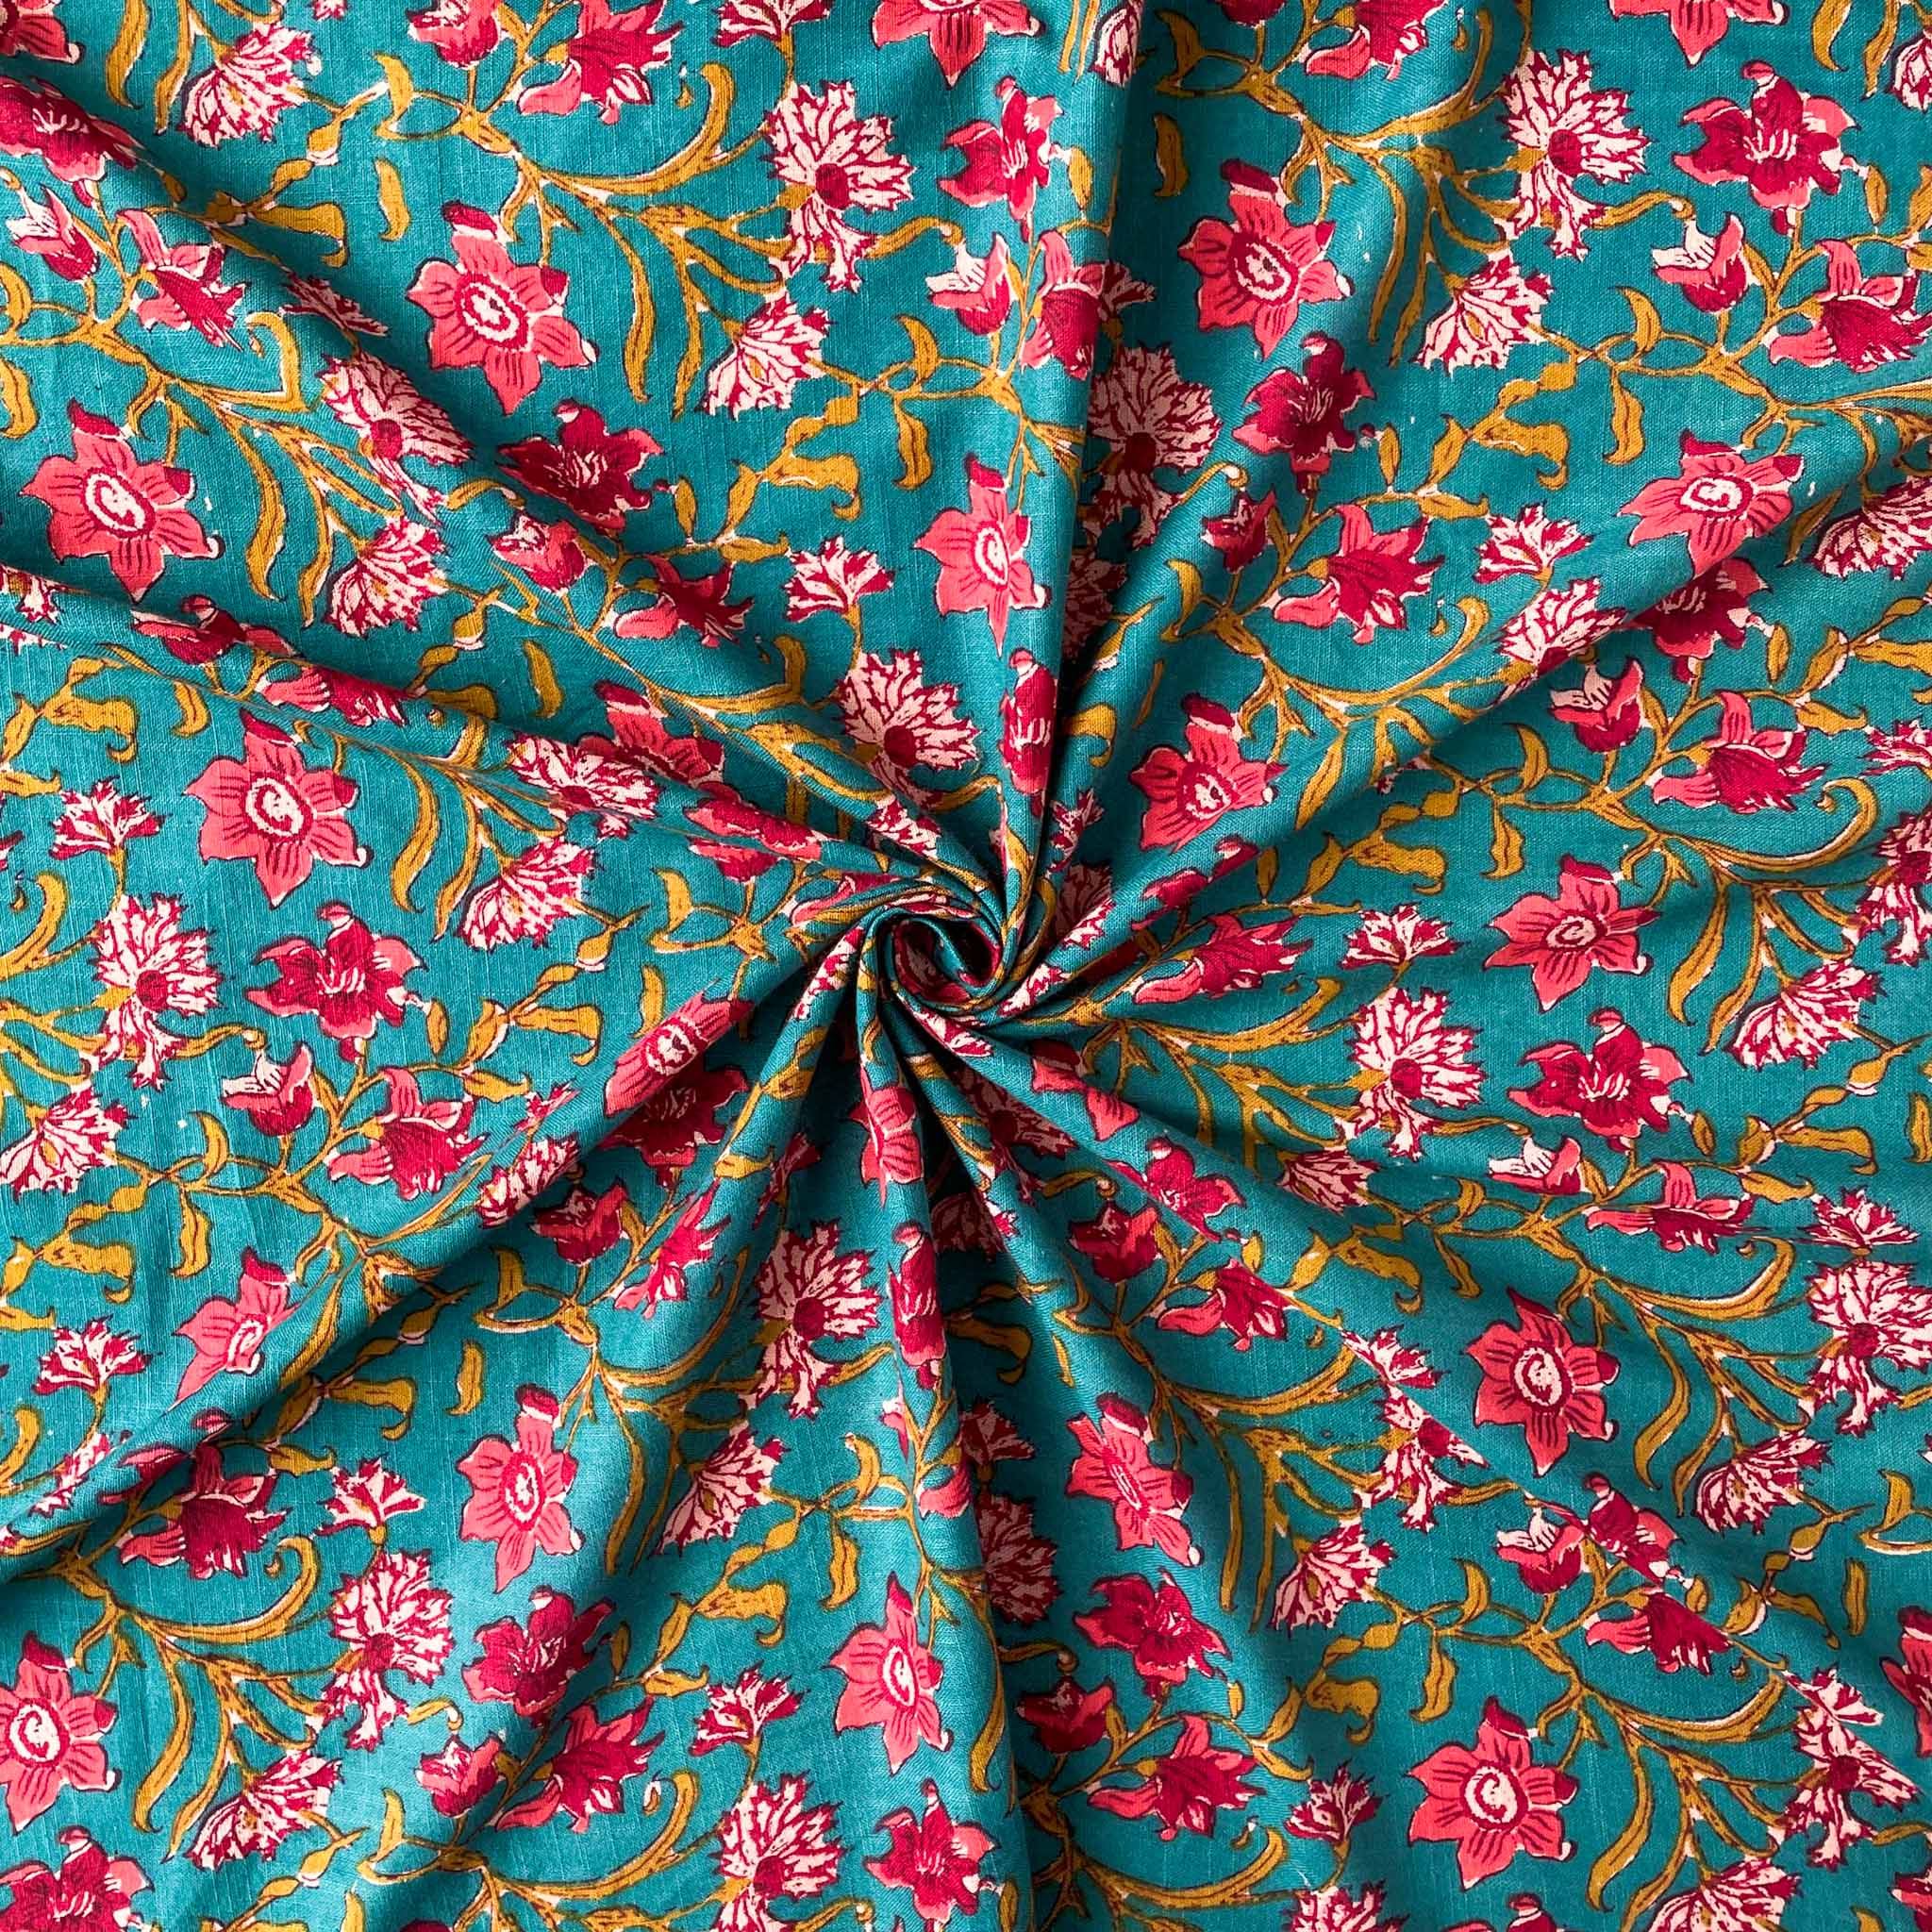 Pastel Green and Peach Blooms & Knots Hand Embroidered & Printed Pure –  Fabric Pandit